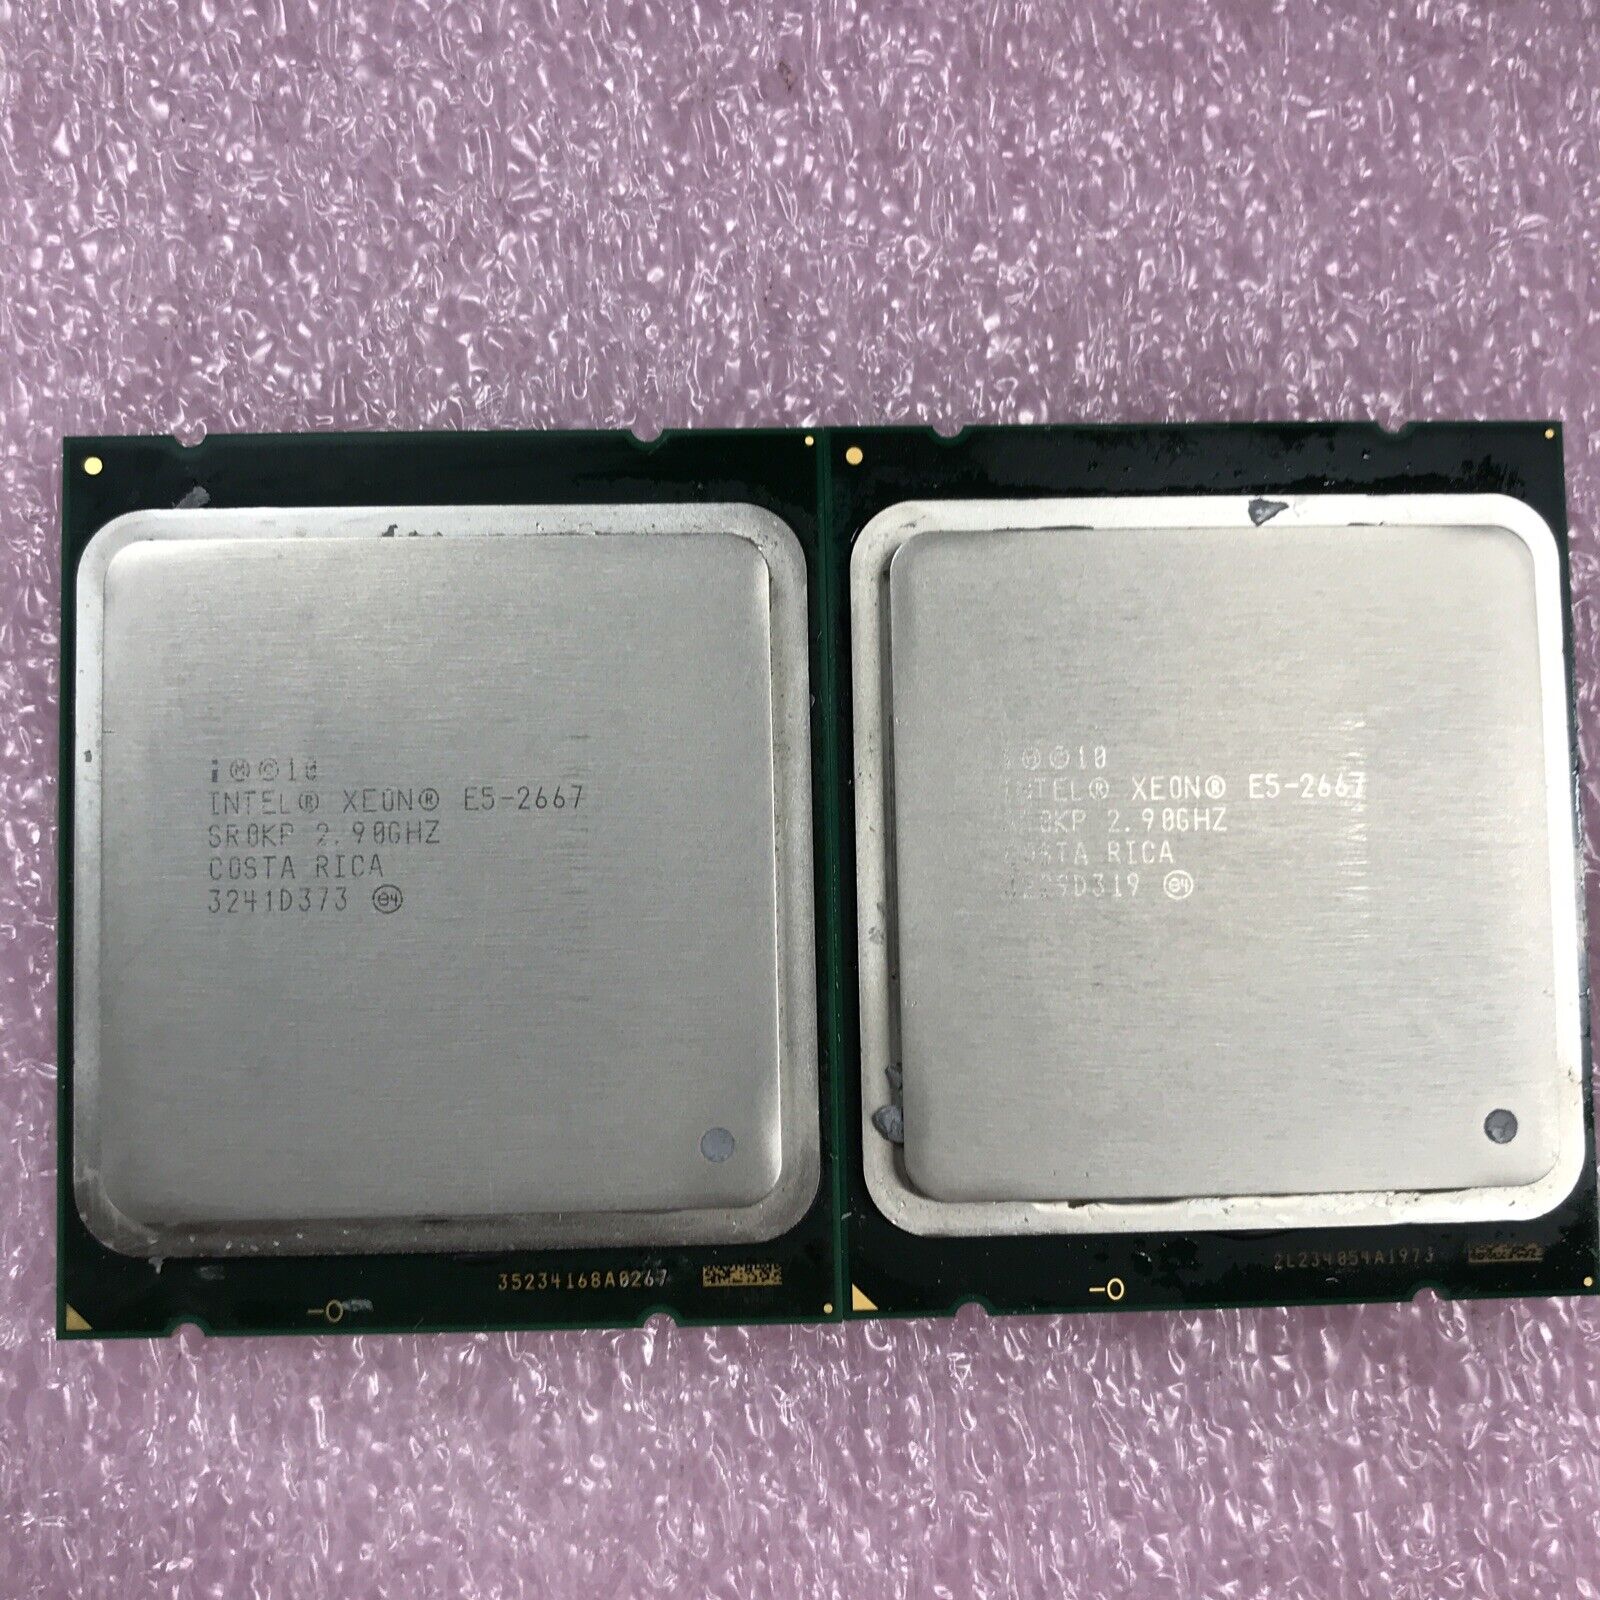 (Lot of 2) Intel E5-2667 SR0KP 2.9GHz (Tested and Working)